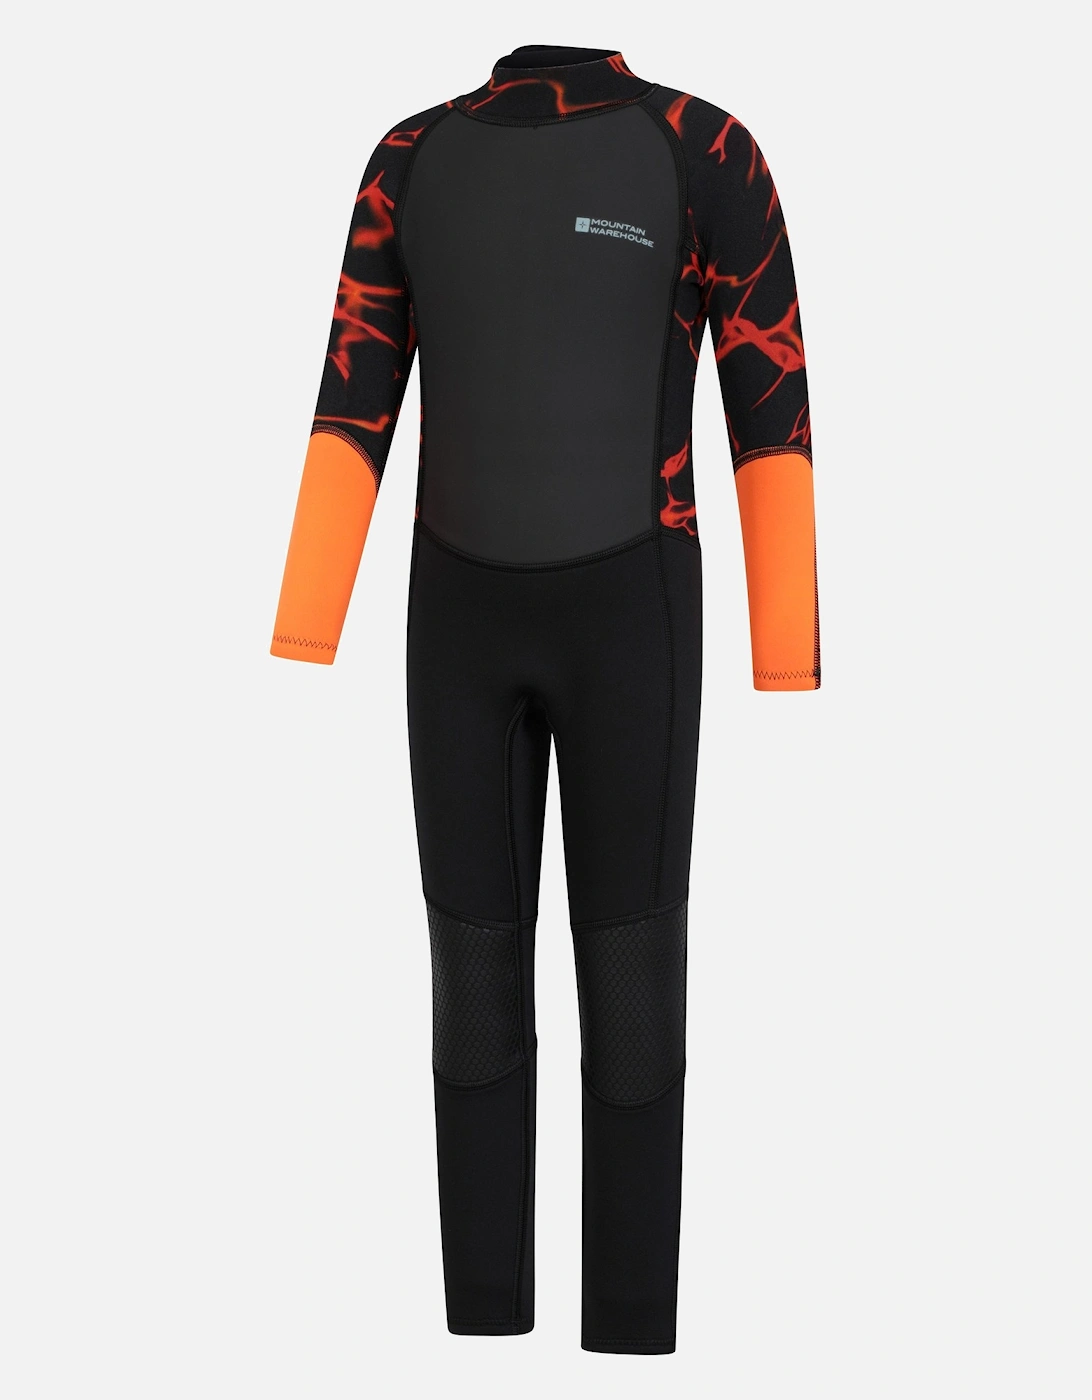 Childrens/Kids Electro Pulse Full Wetsuit